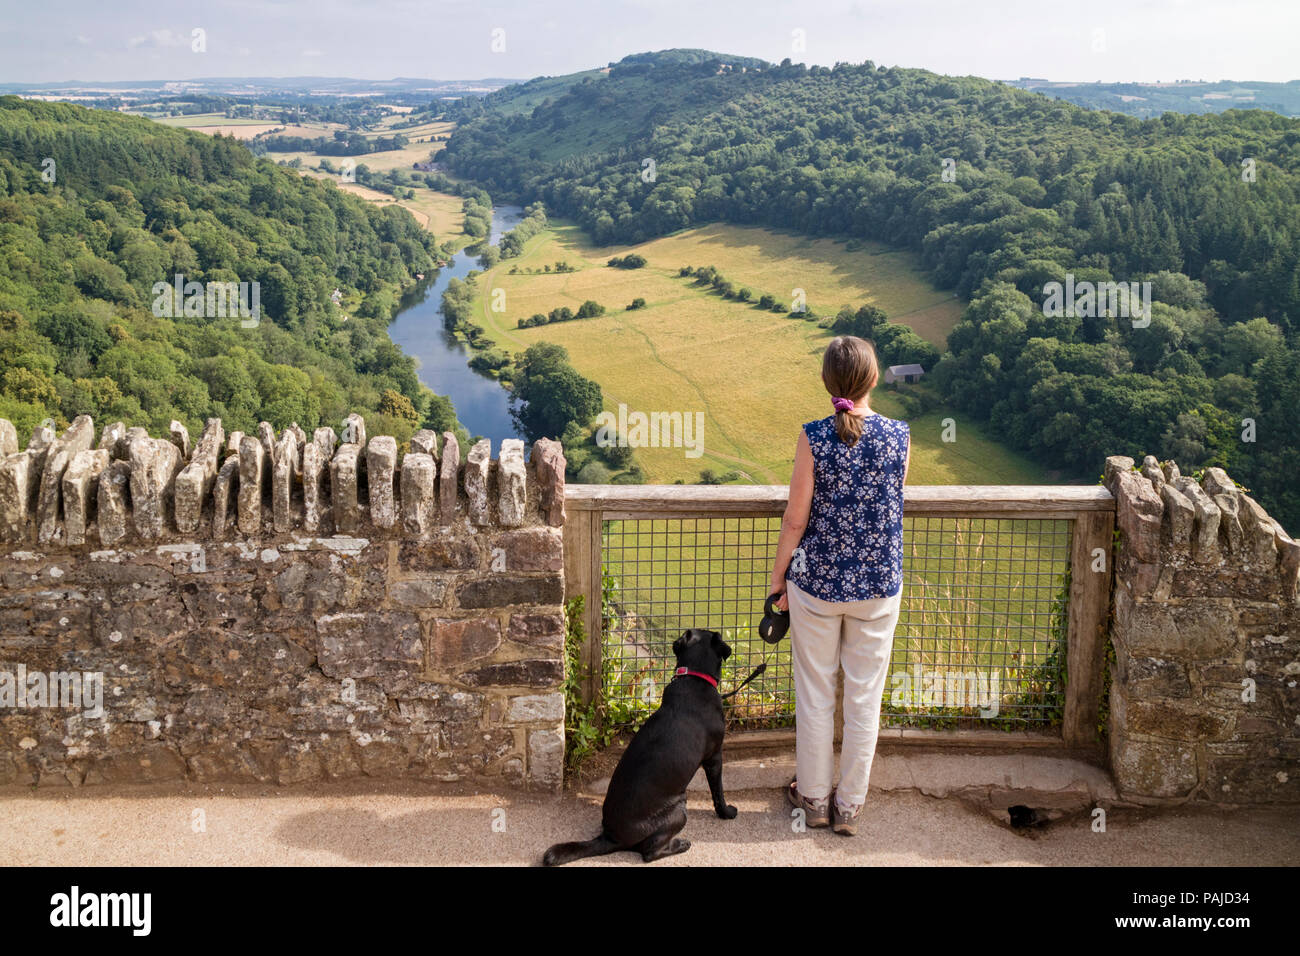 A view over the River Wye at Symonds Yat Rock, Herefordshire, England, UK. Stock Photo